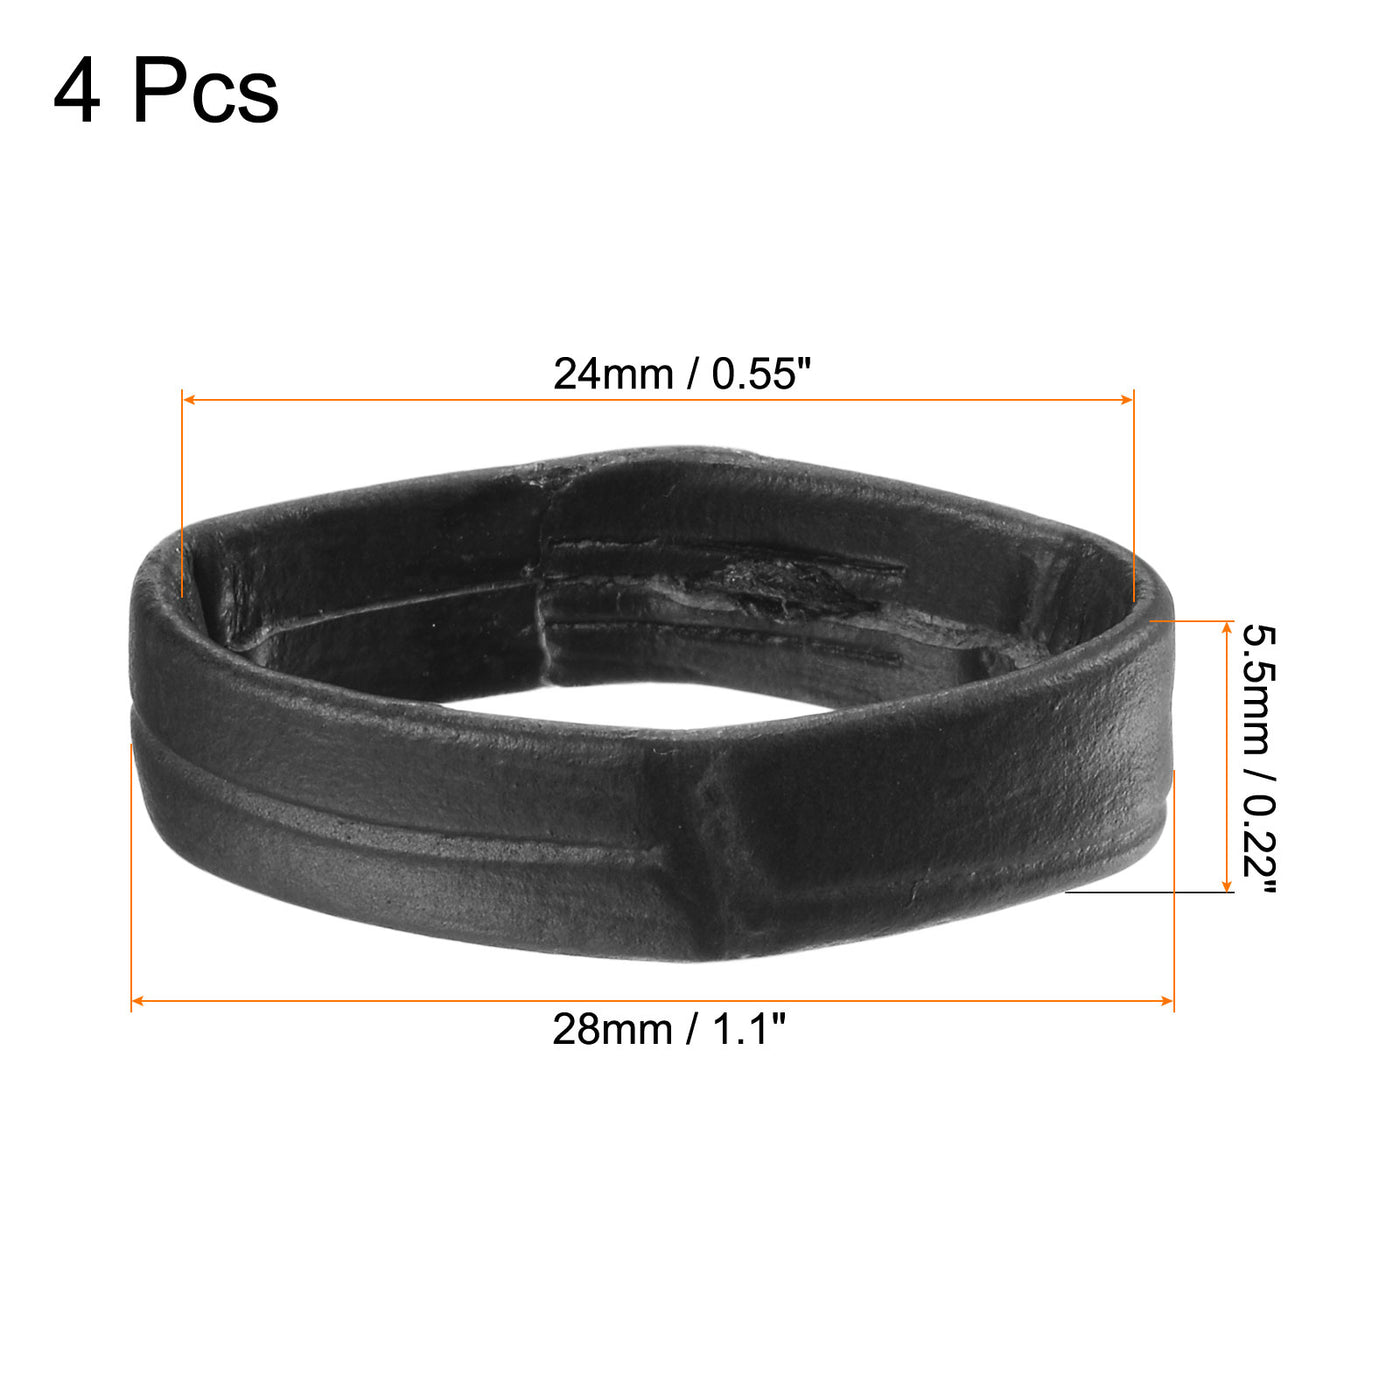 Uxcell Uxcell 4 Pcs PU Leather Loops Retaining Ring for 26mm Width Watch Band, Brown